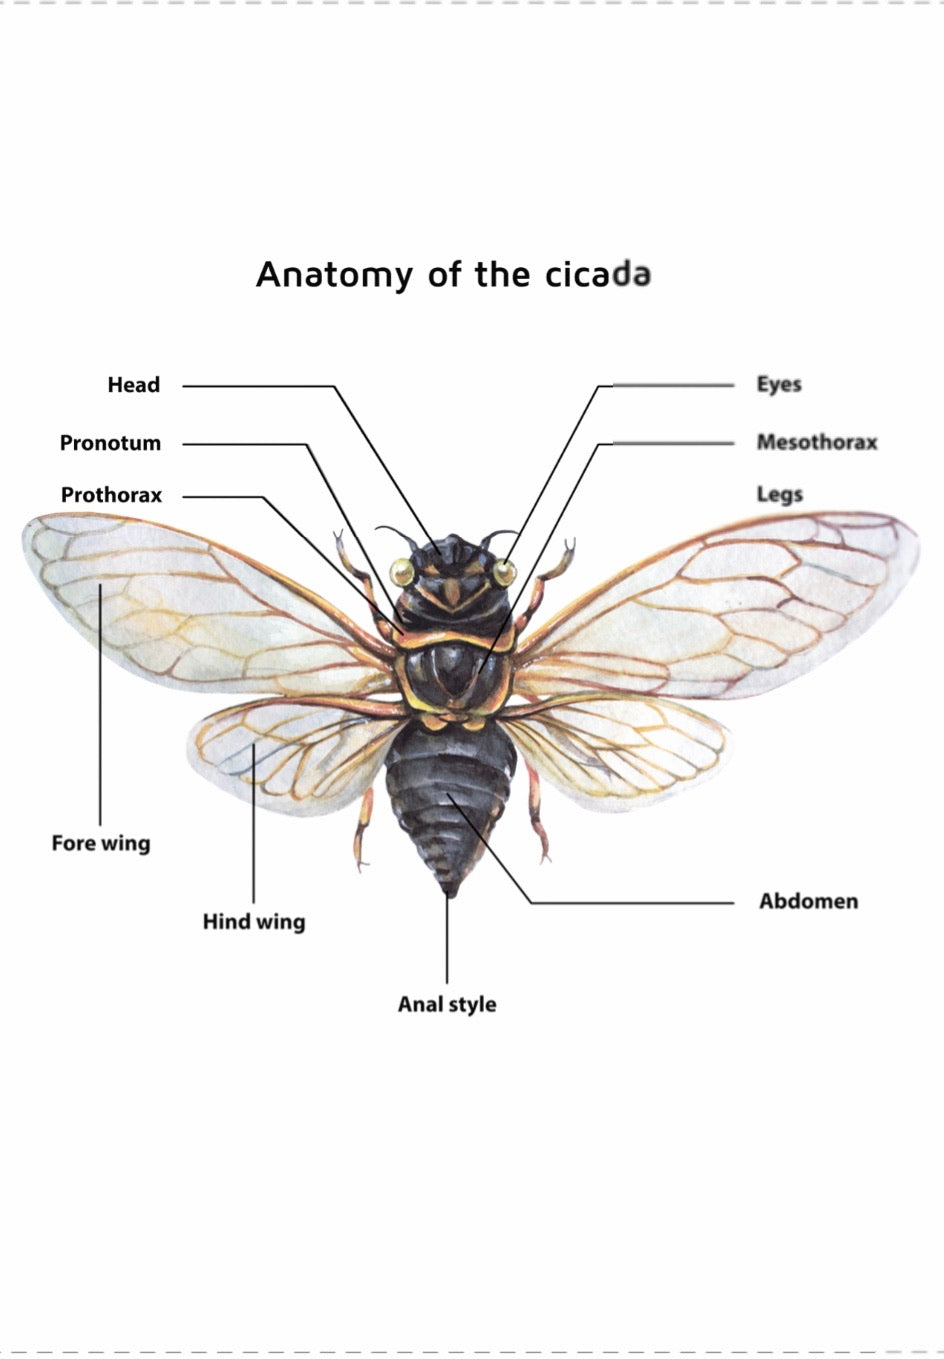 Cicada, Mantis, Spider, and Snail Anatomy (PDF only)